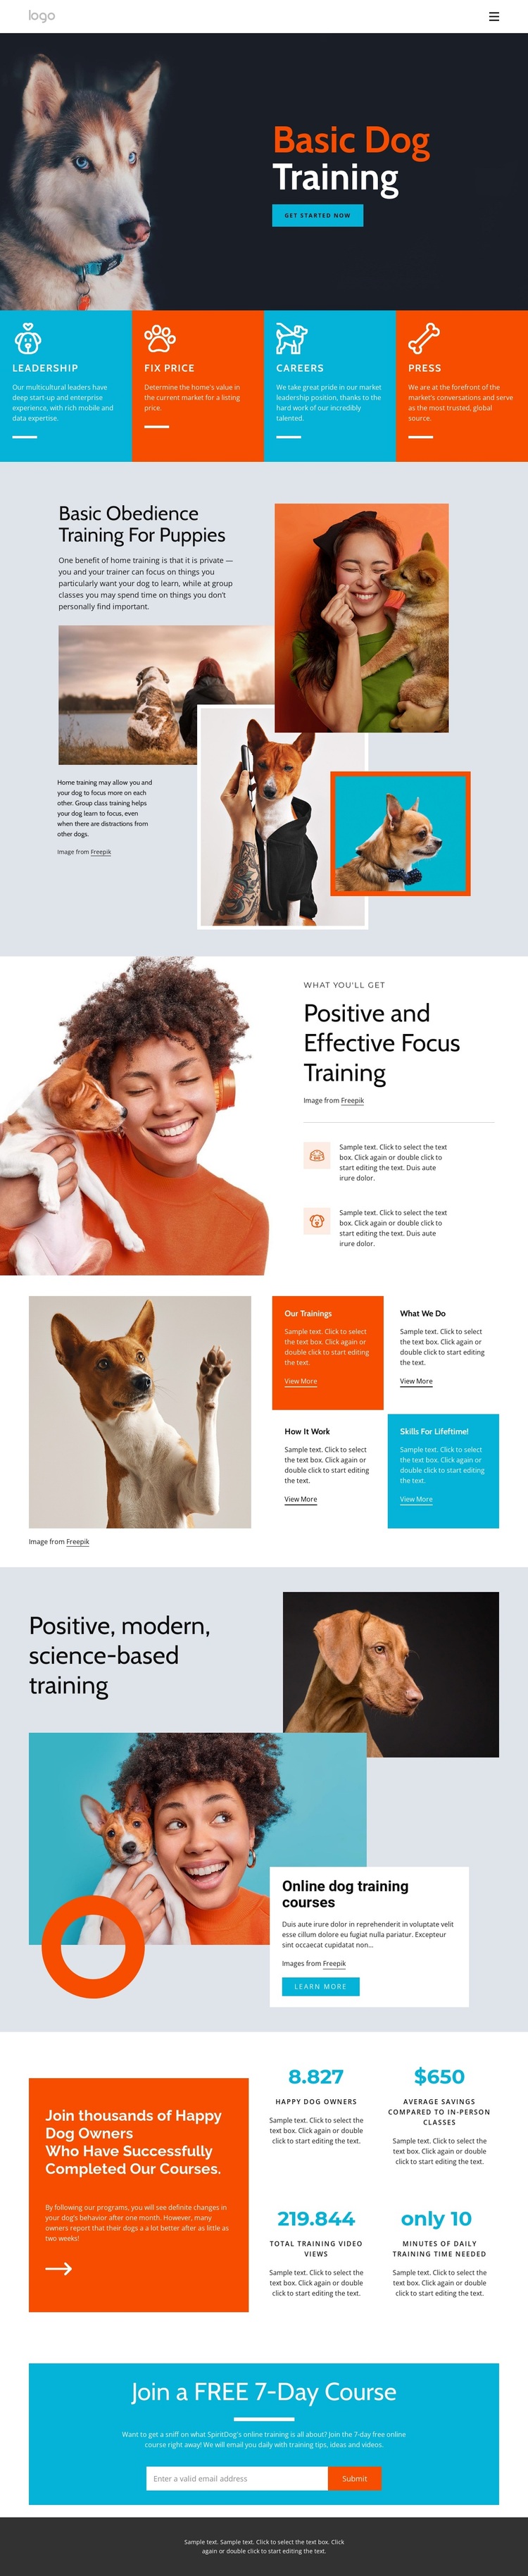 Dog training courses Template